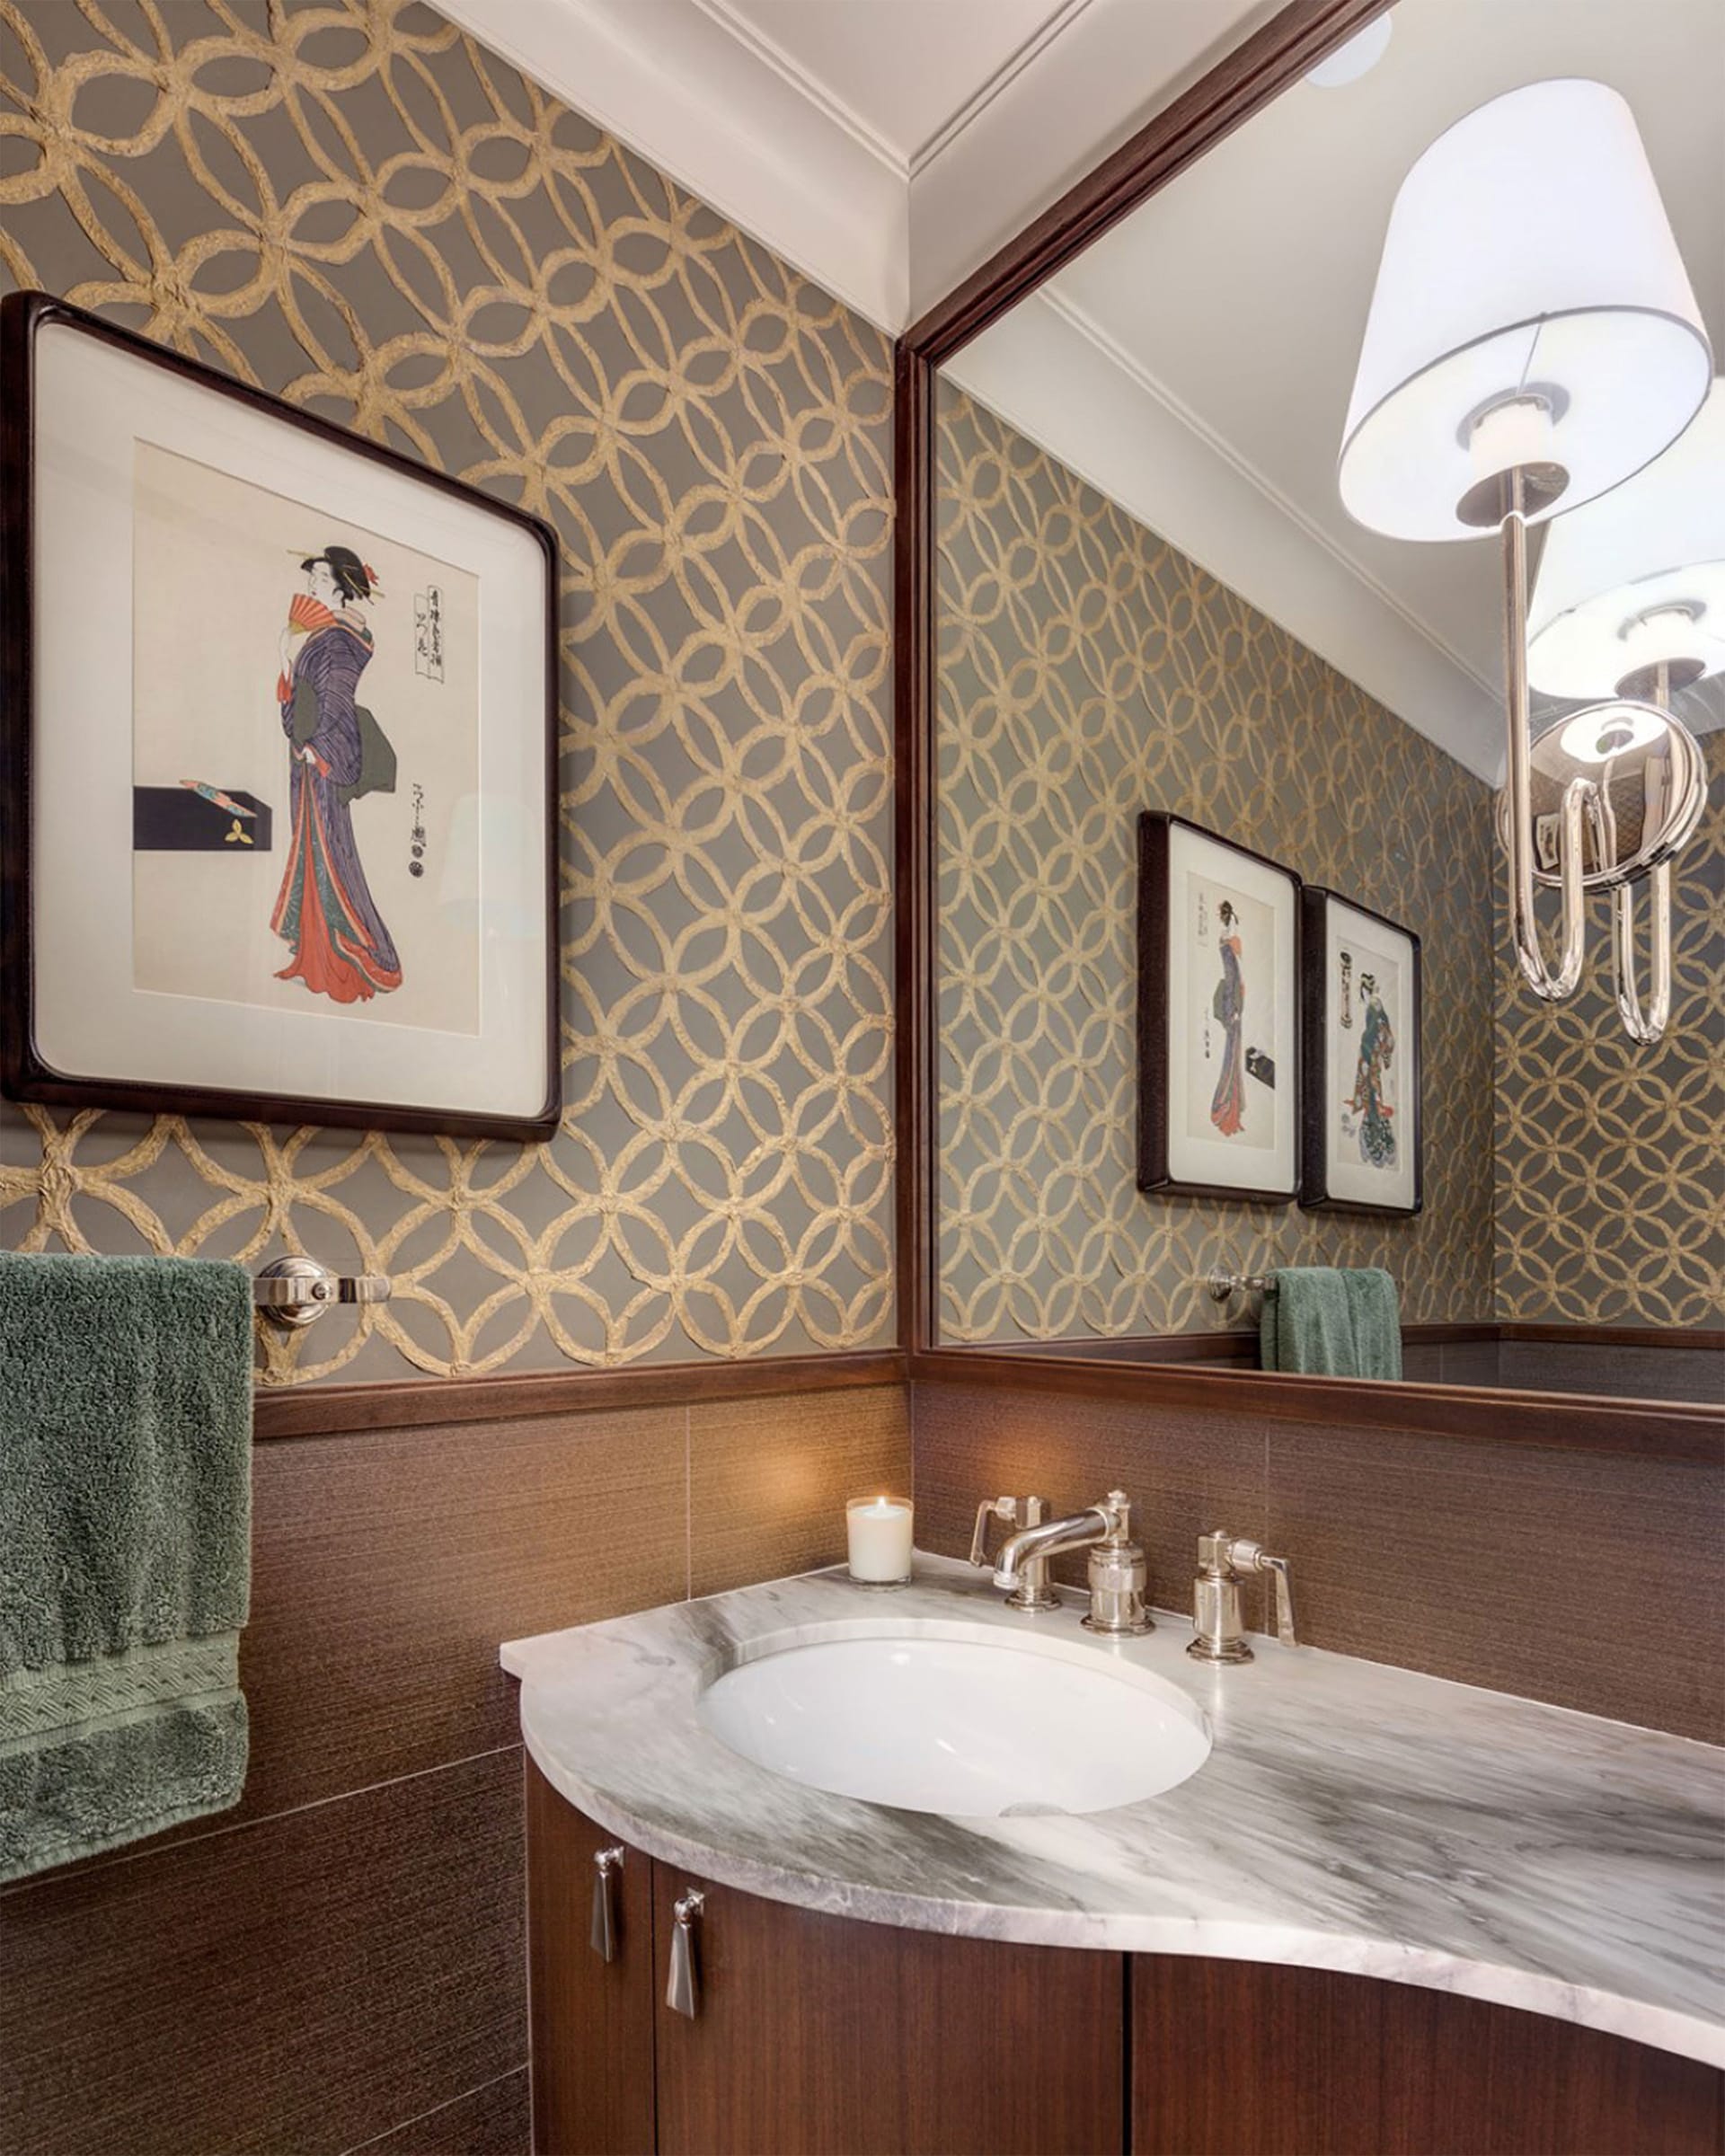 Powder room with wallpapered walls, a marble countertop, two paintings on the wall, and a sconce light